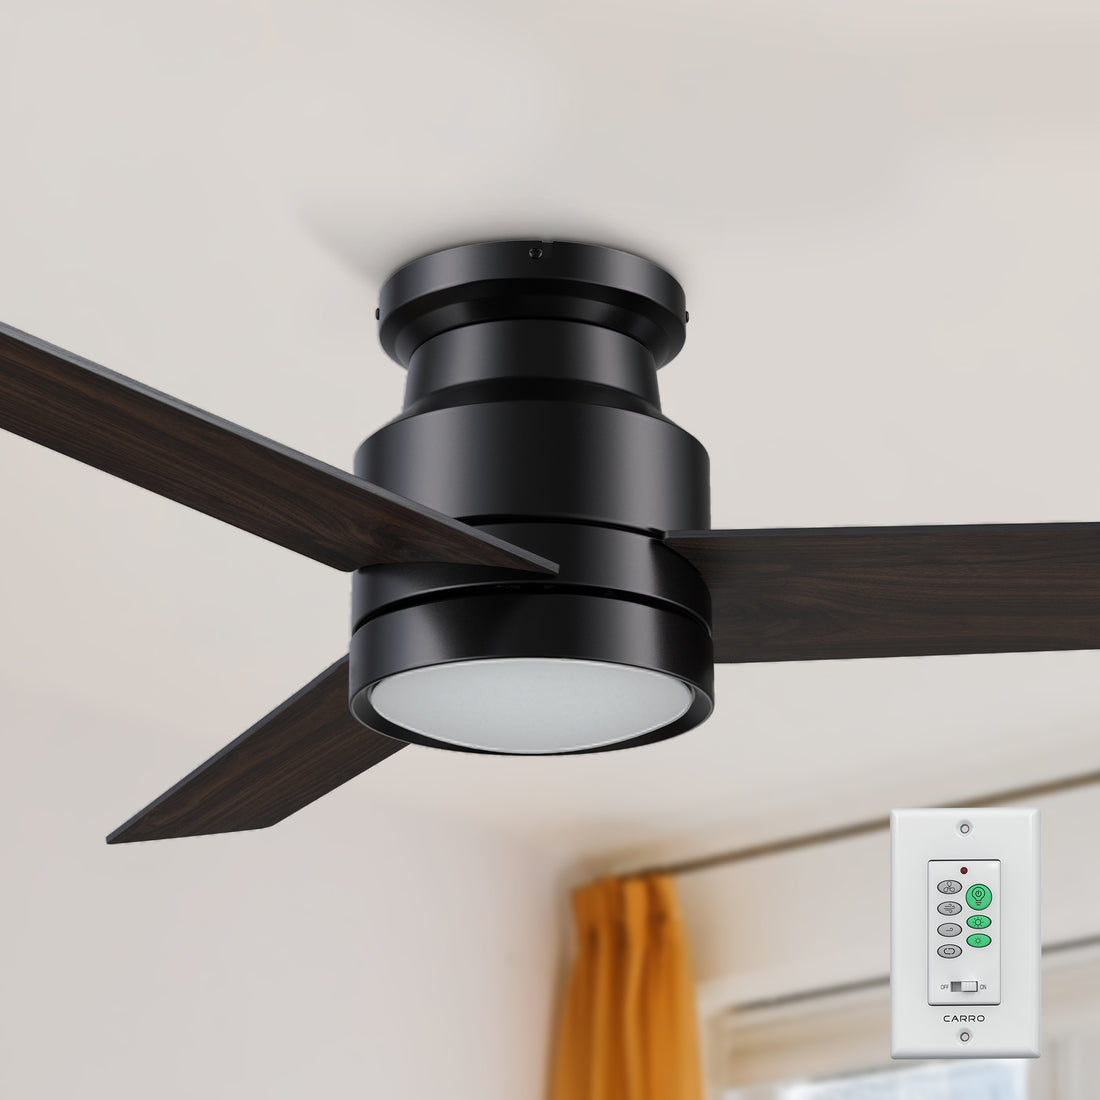 52-inch black flush mounting ceiling fan with dimmable LED light and wall switch control.